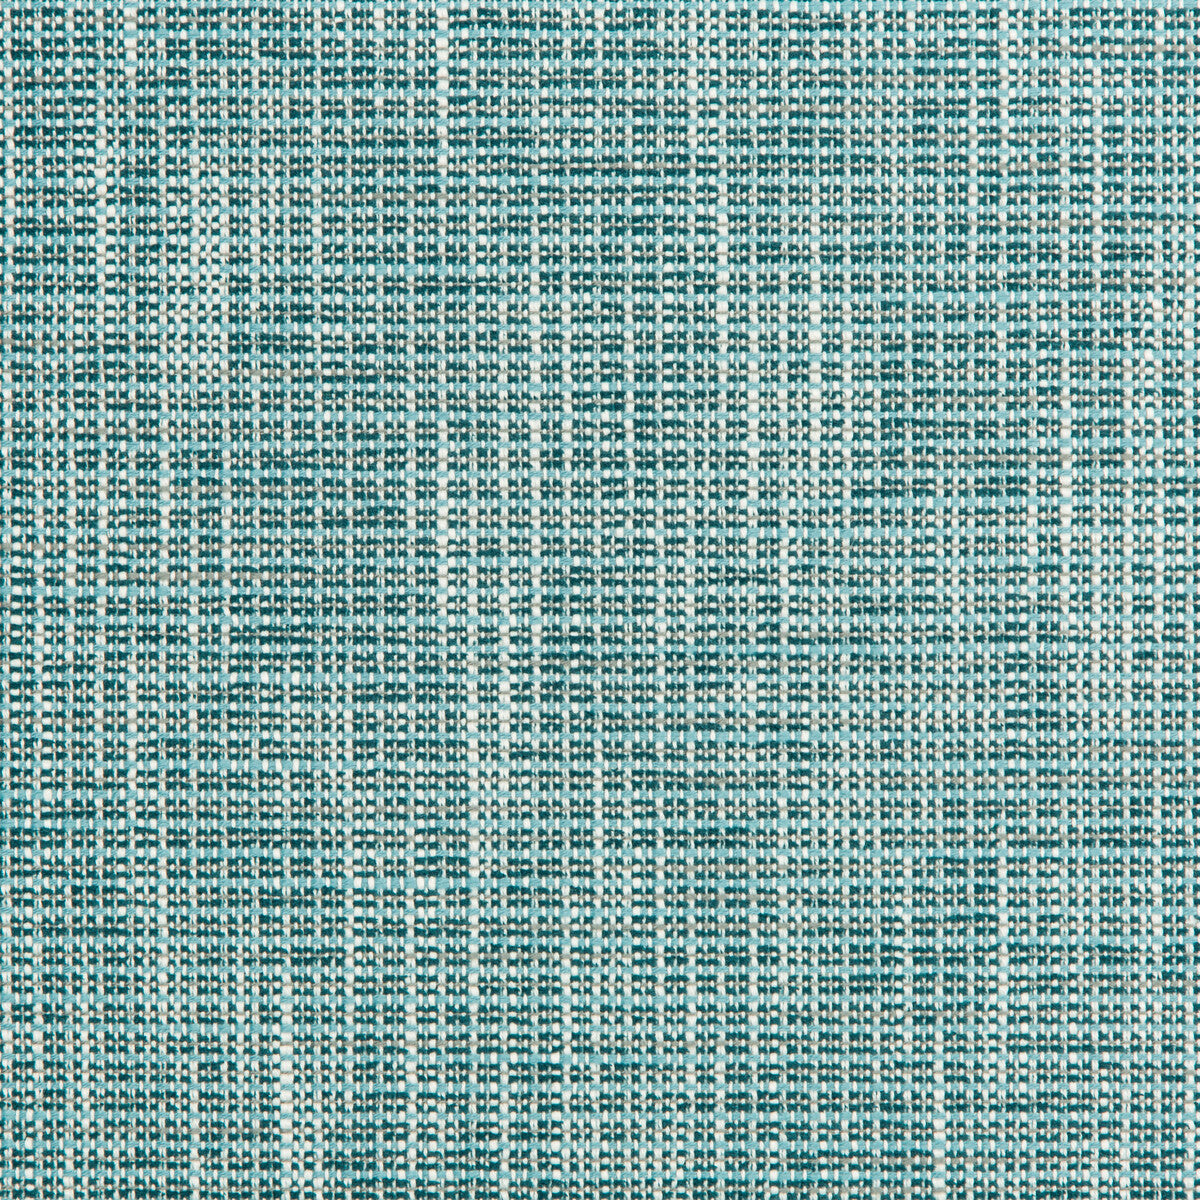 River Park fabric in lagoon color - pattern 35866.35.0 - by Kravet Contract in the Gis Crypton collection